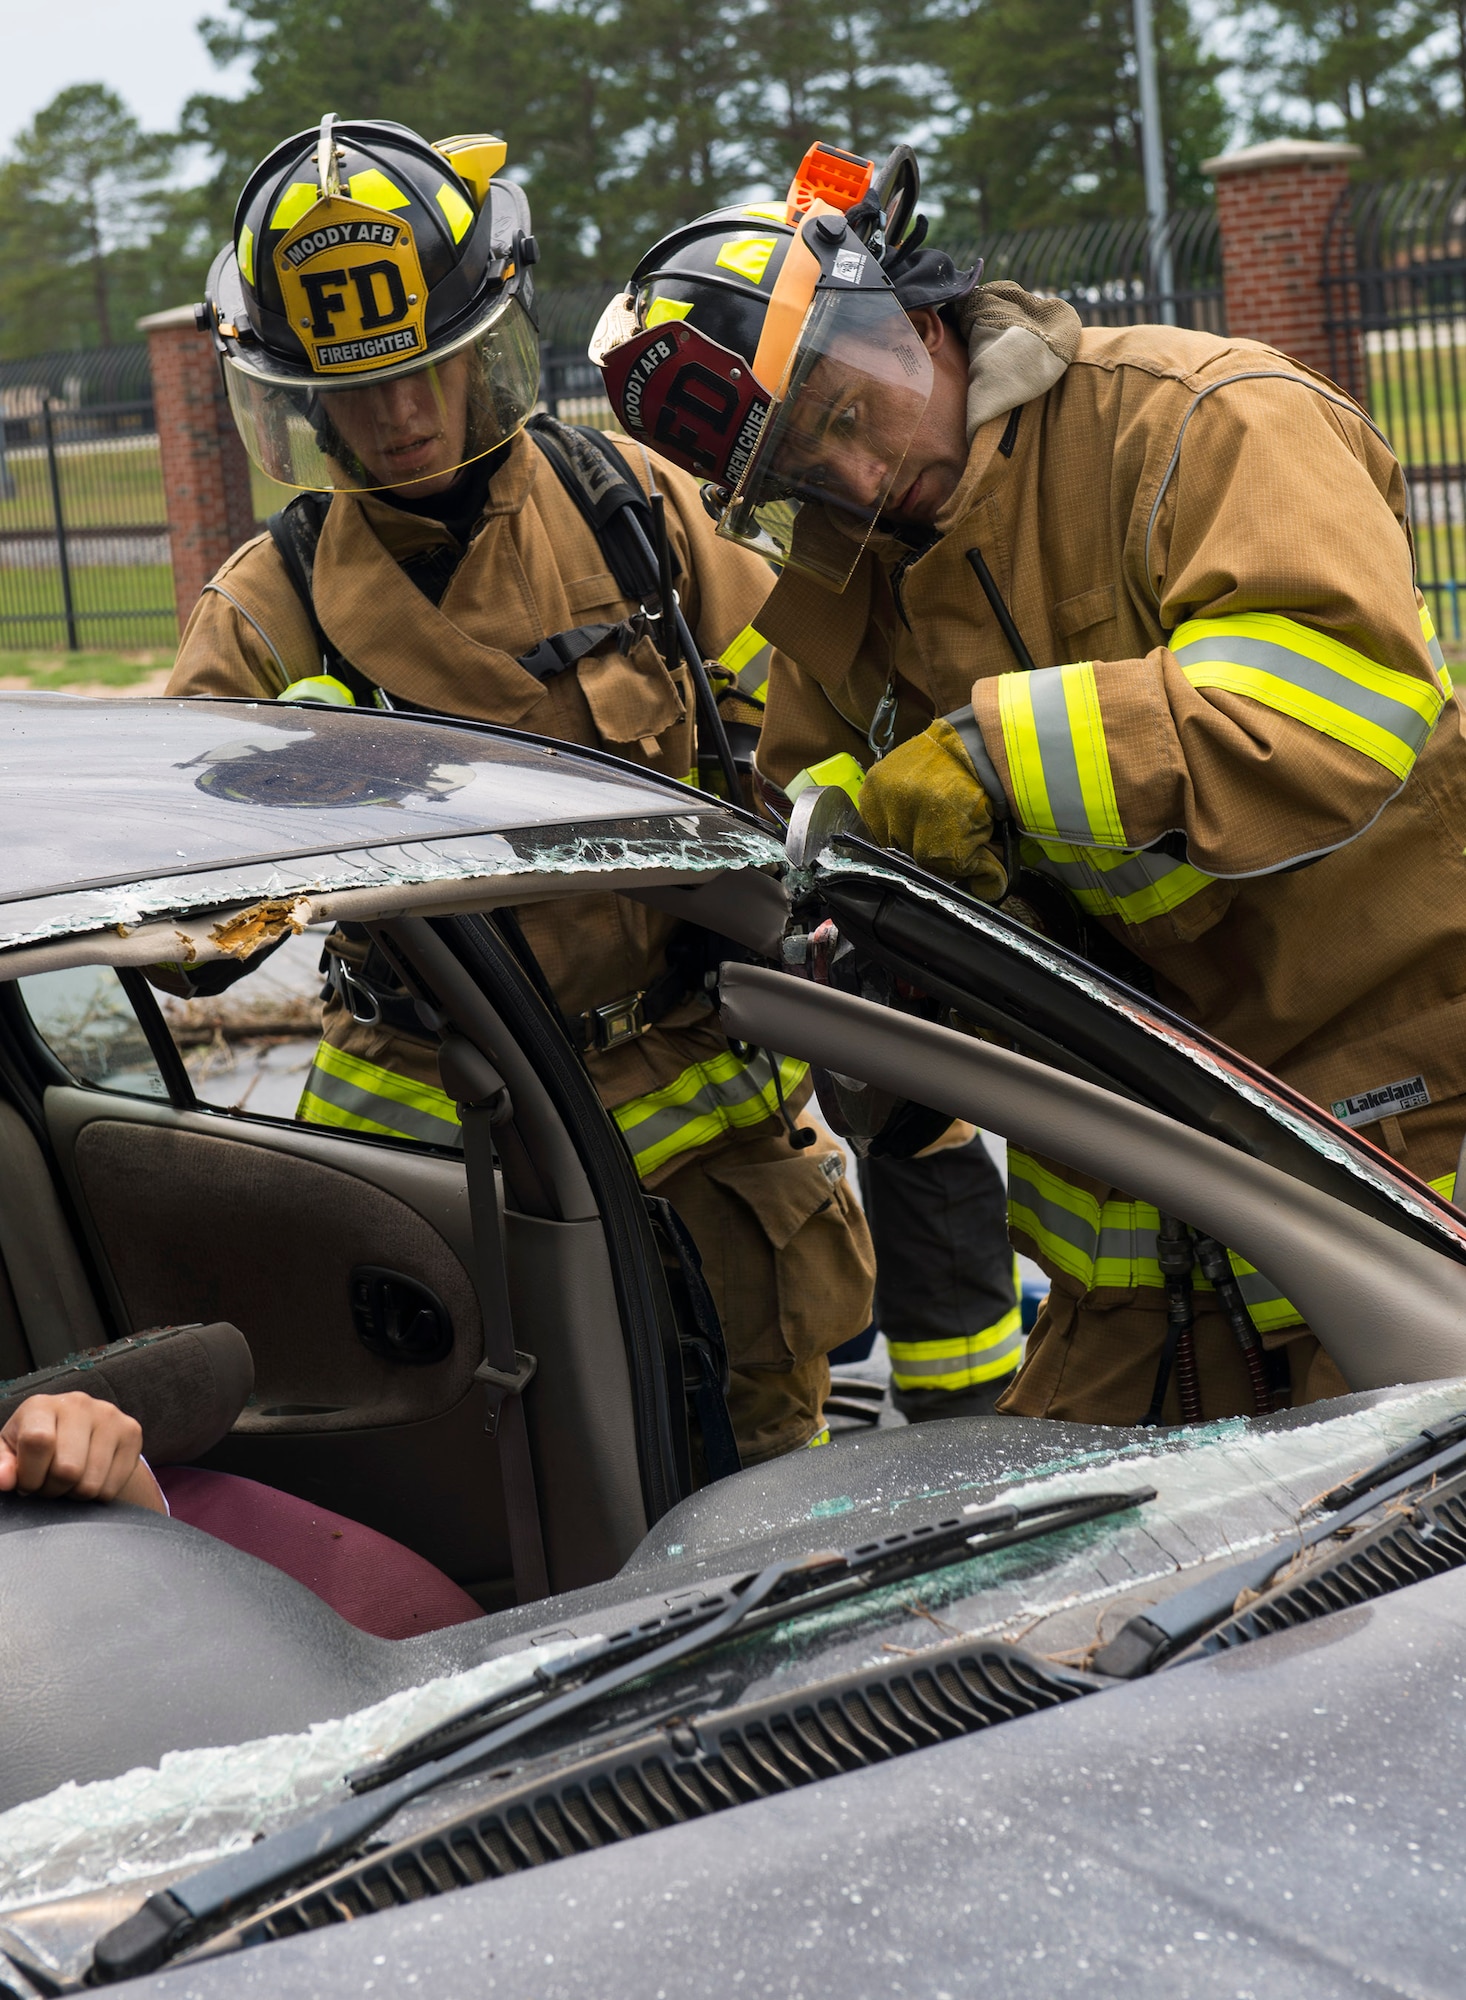 U.S. Air Force Staff Sgt. John Reinoehl, 23d Civil Engineer Squadron fire department crew chief, simulates using a vehicle extrication cutter to remove an injured car accident victim during a hurricane exercise, May 17, 2016, at Moody Air Force Base, Ga. Due to the driver’s injuries, first responders had to remove the vehicle’s roof and windshields to rescue her without causing further harm.  (U.S. Air Force photo by Airman 1st Class Greg Nash/Released)